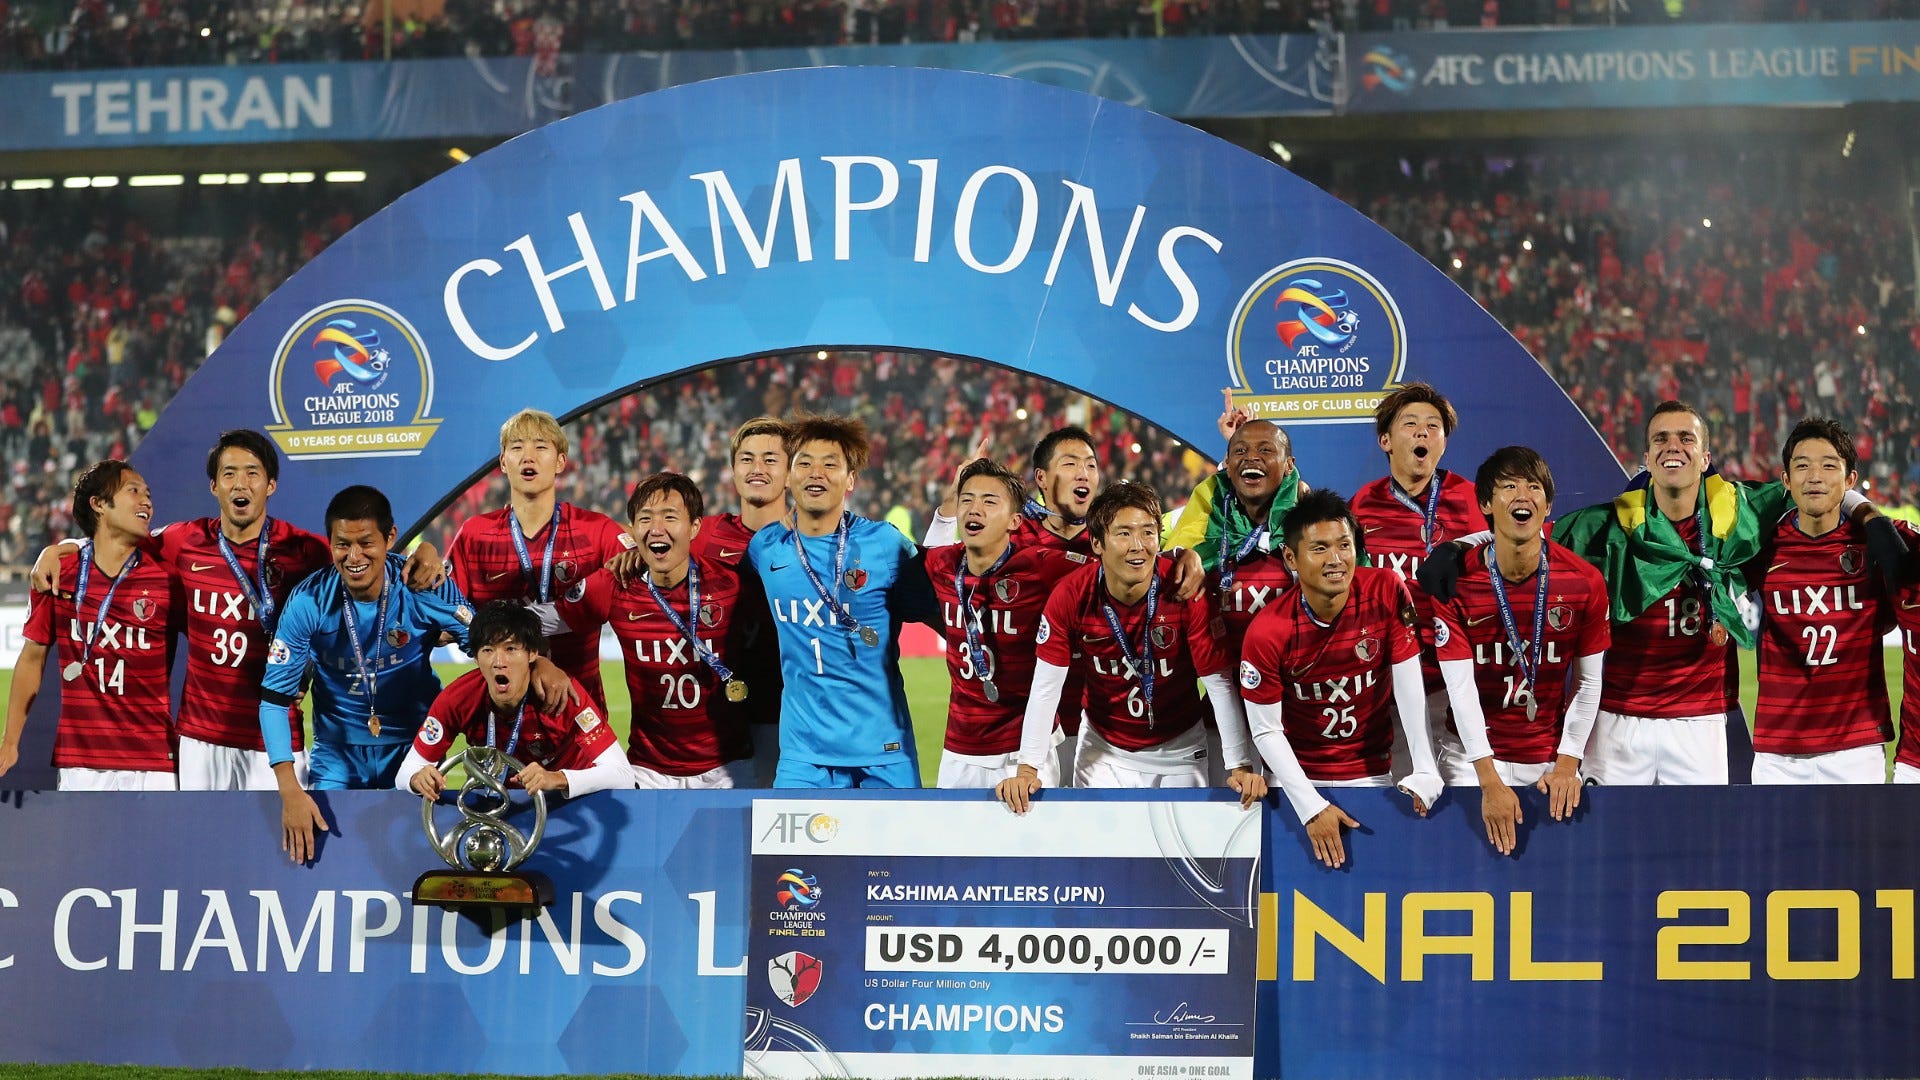 AFC Champions League - Here's a list of the Asian teams that have